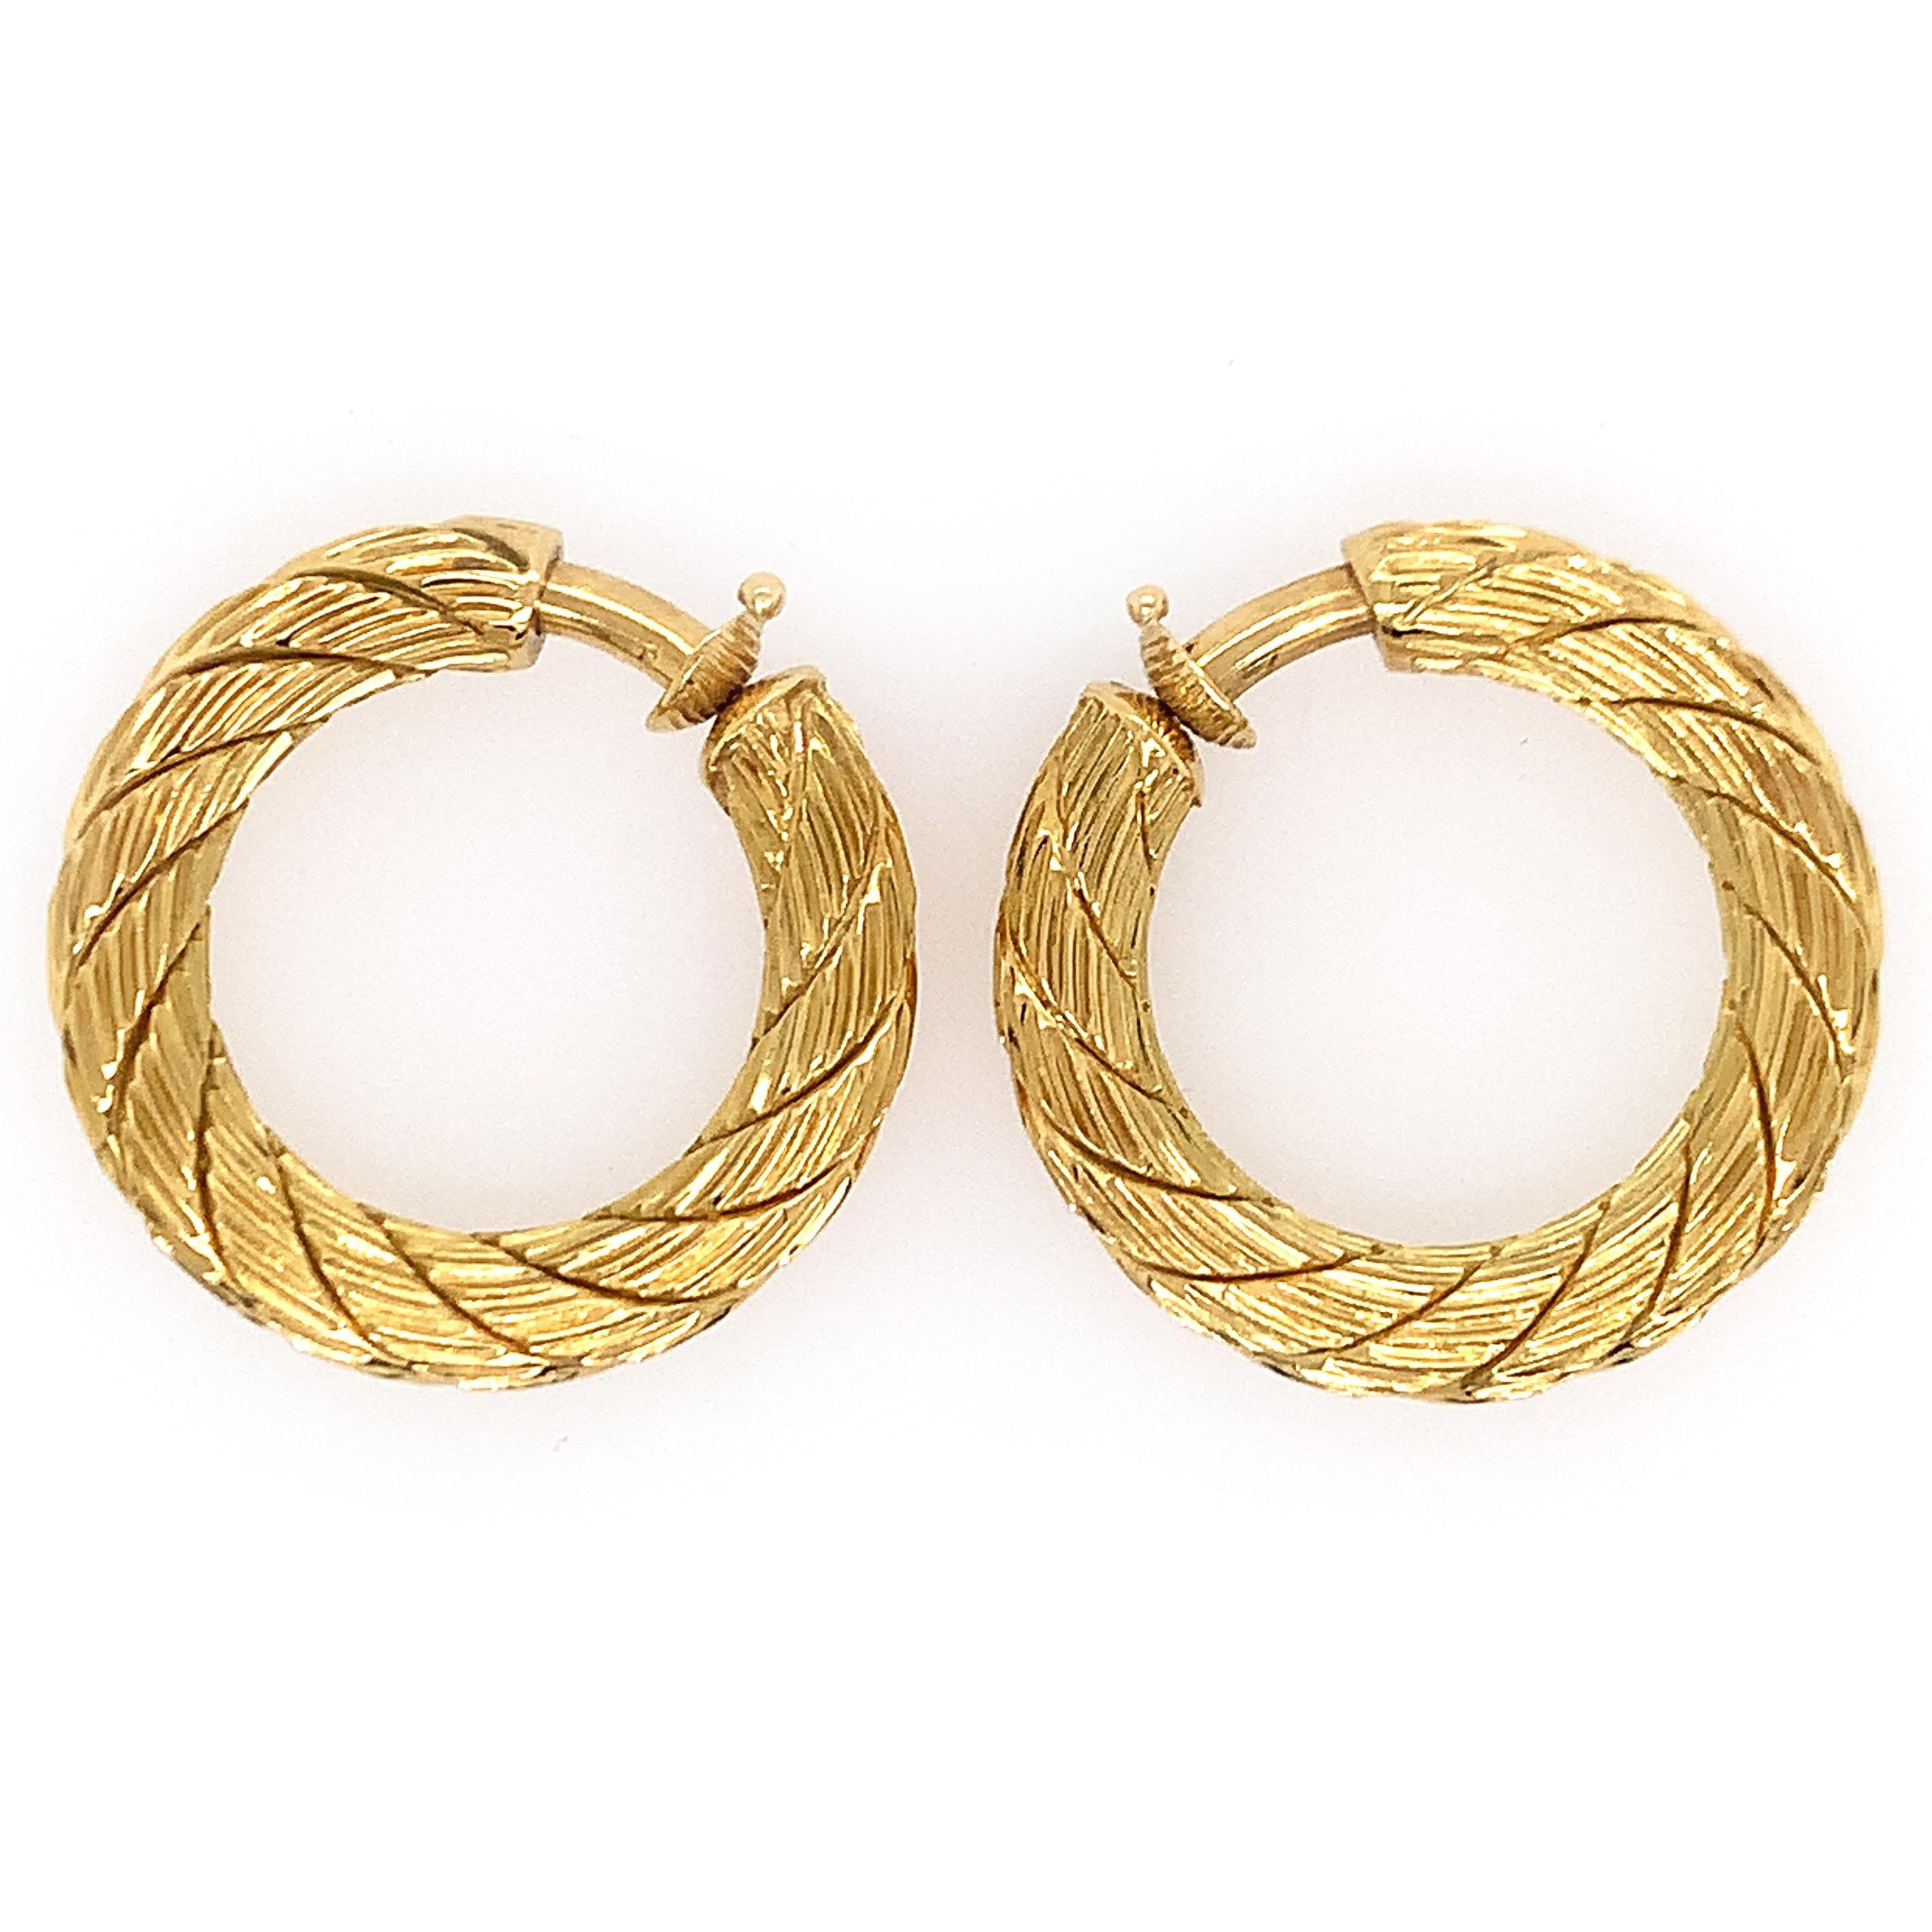 Gold Hoop Earclips In Excellent Condition For Sale In New York, NY